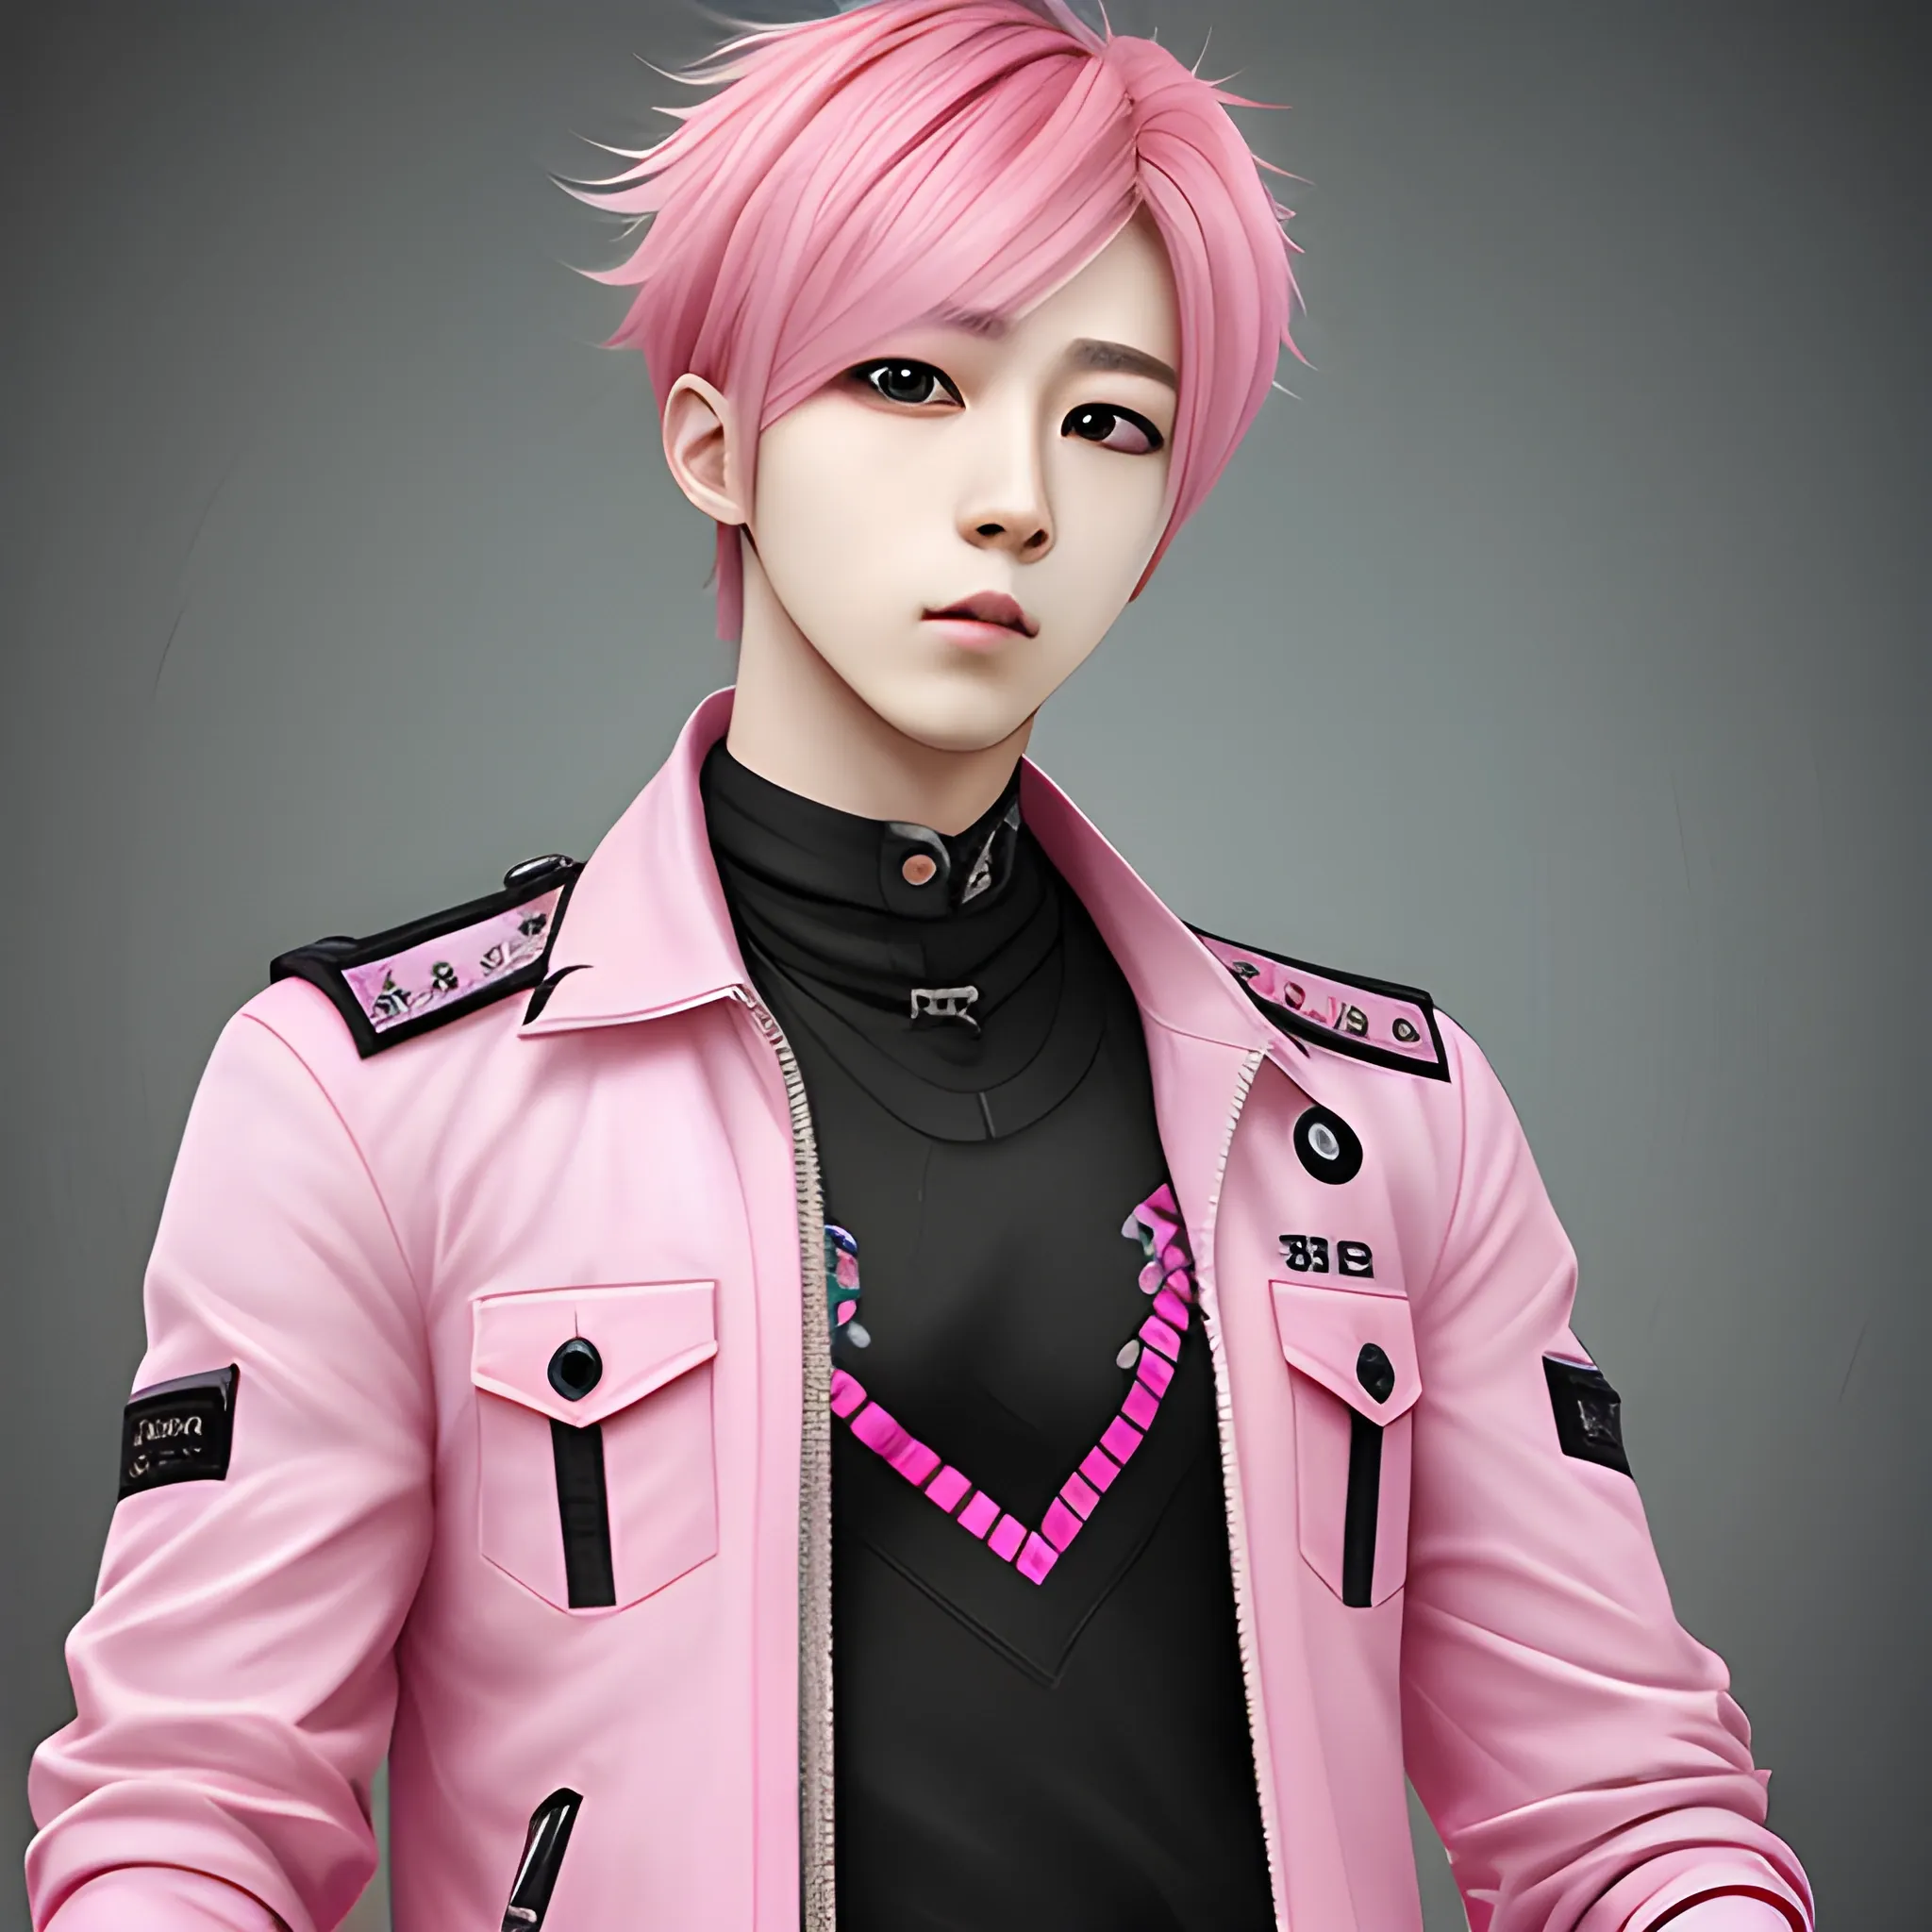 male character, cute, pink hair, k pop idol style, realistic paint, handsome and CUTE